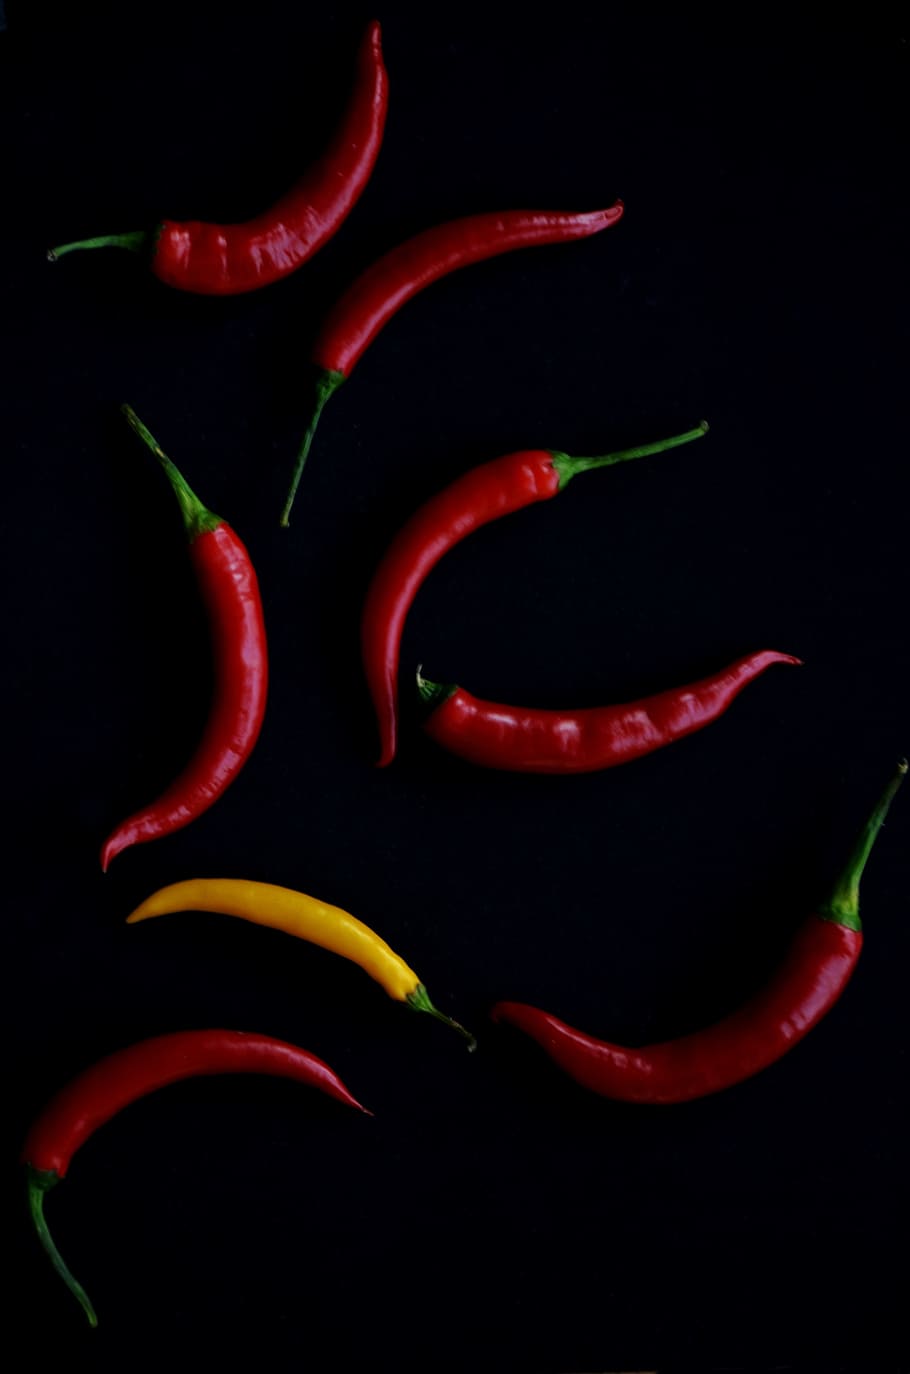 HD wallpaper: red chili peppers, hot, spicy, food, spice, ingredient,  cooking | Wallpaper Flare